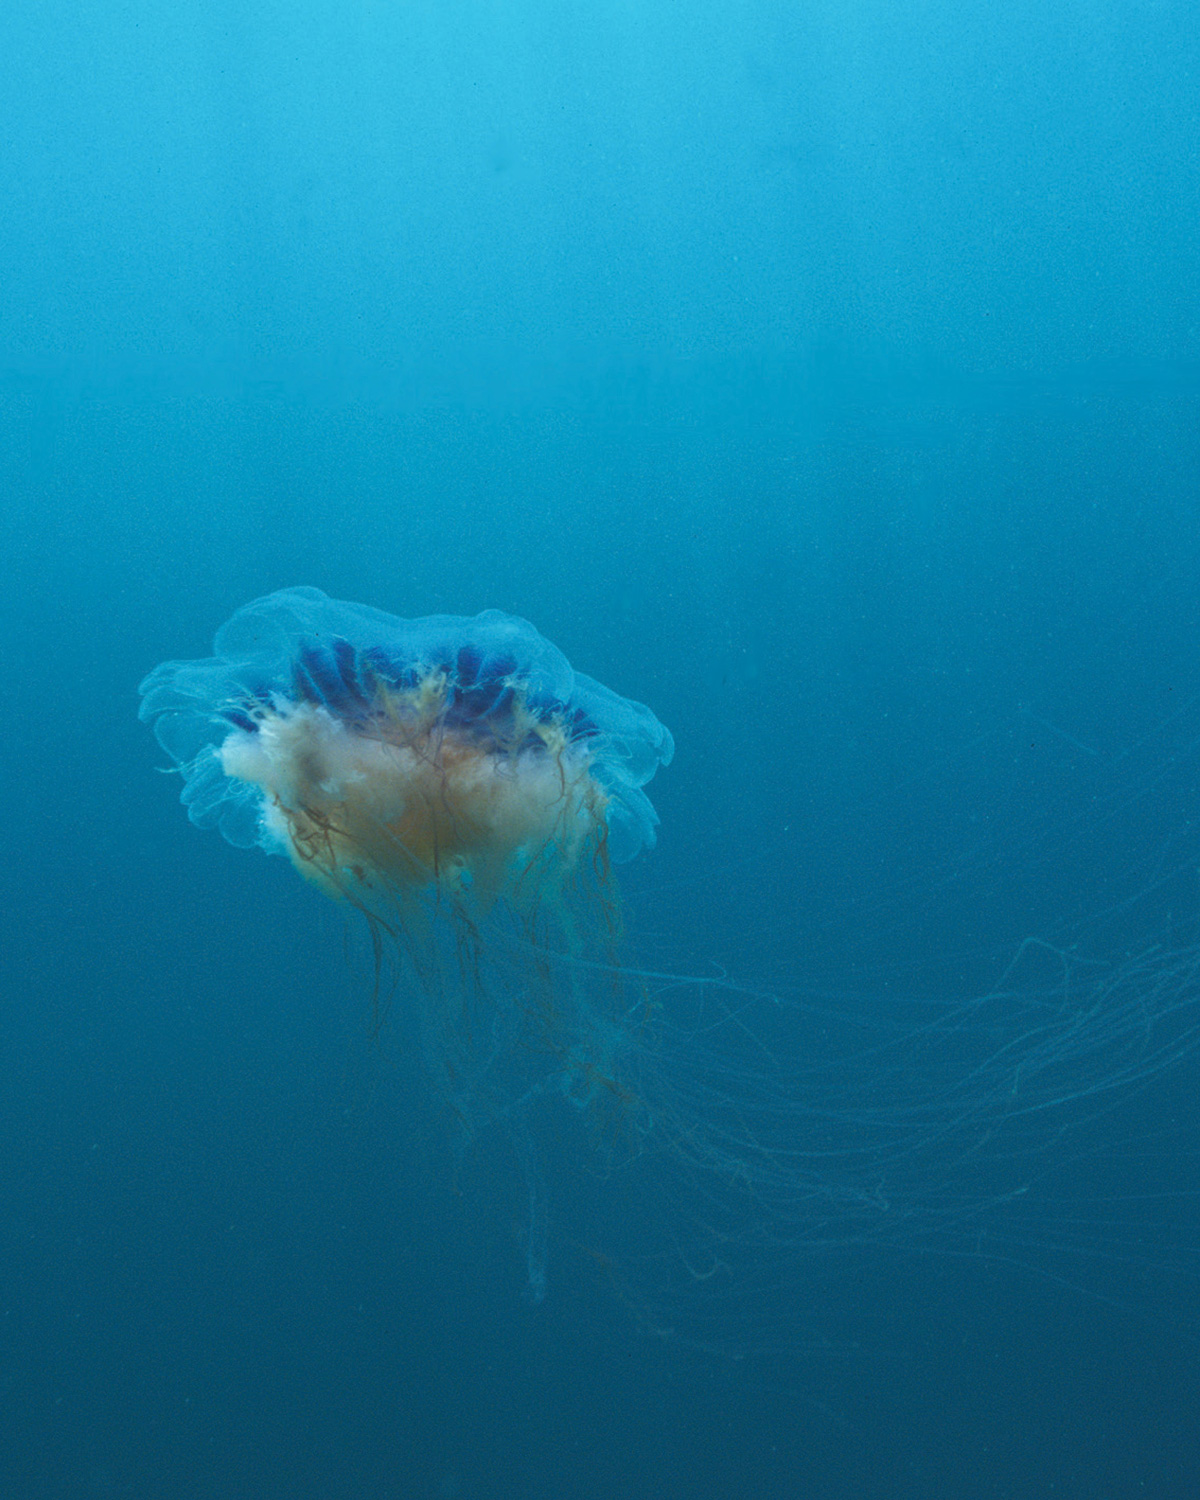 A photograph of Cyanea Lamarckii, commonly called the Bluefire or Blue Jellyfish, photographed off the waters off the coast of Britain.